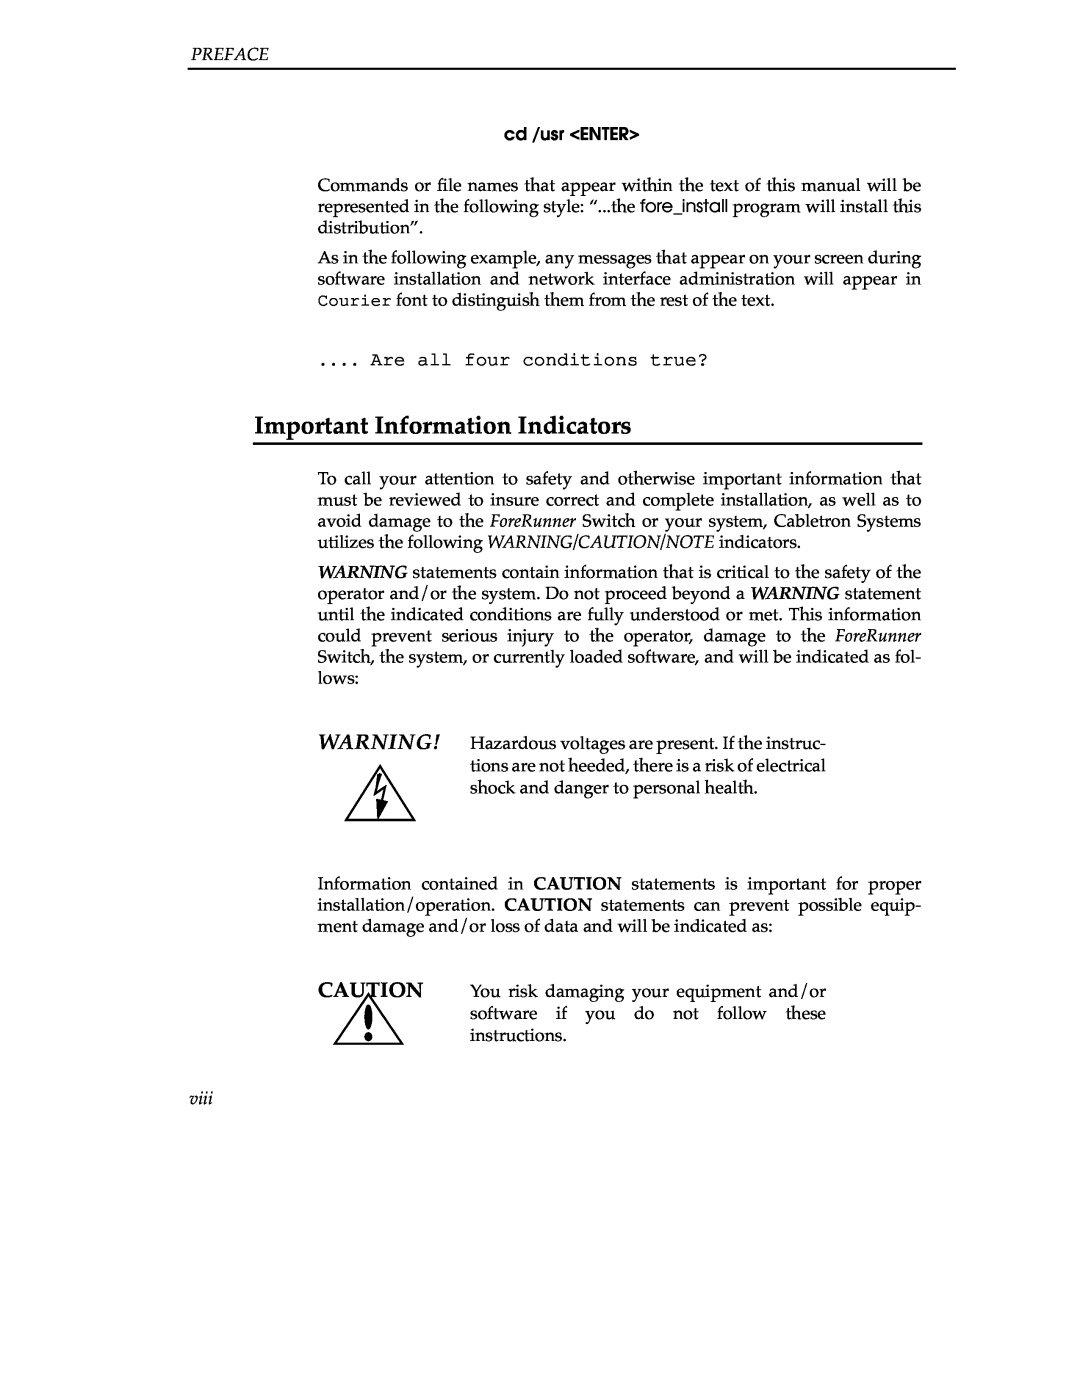 Cabletron Systems 9A000 manual Important Information Indicators, Preface, viii, Are all four conditions true? 